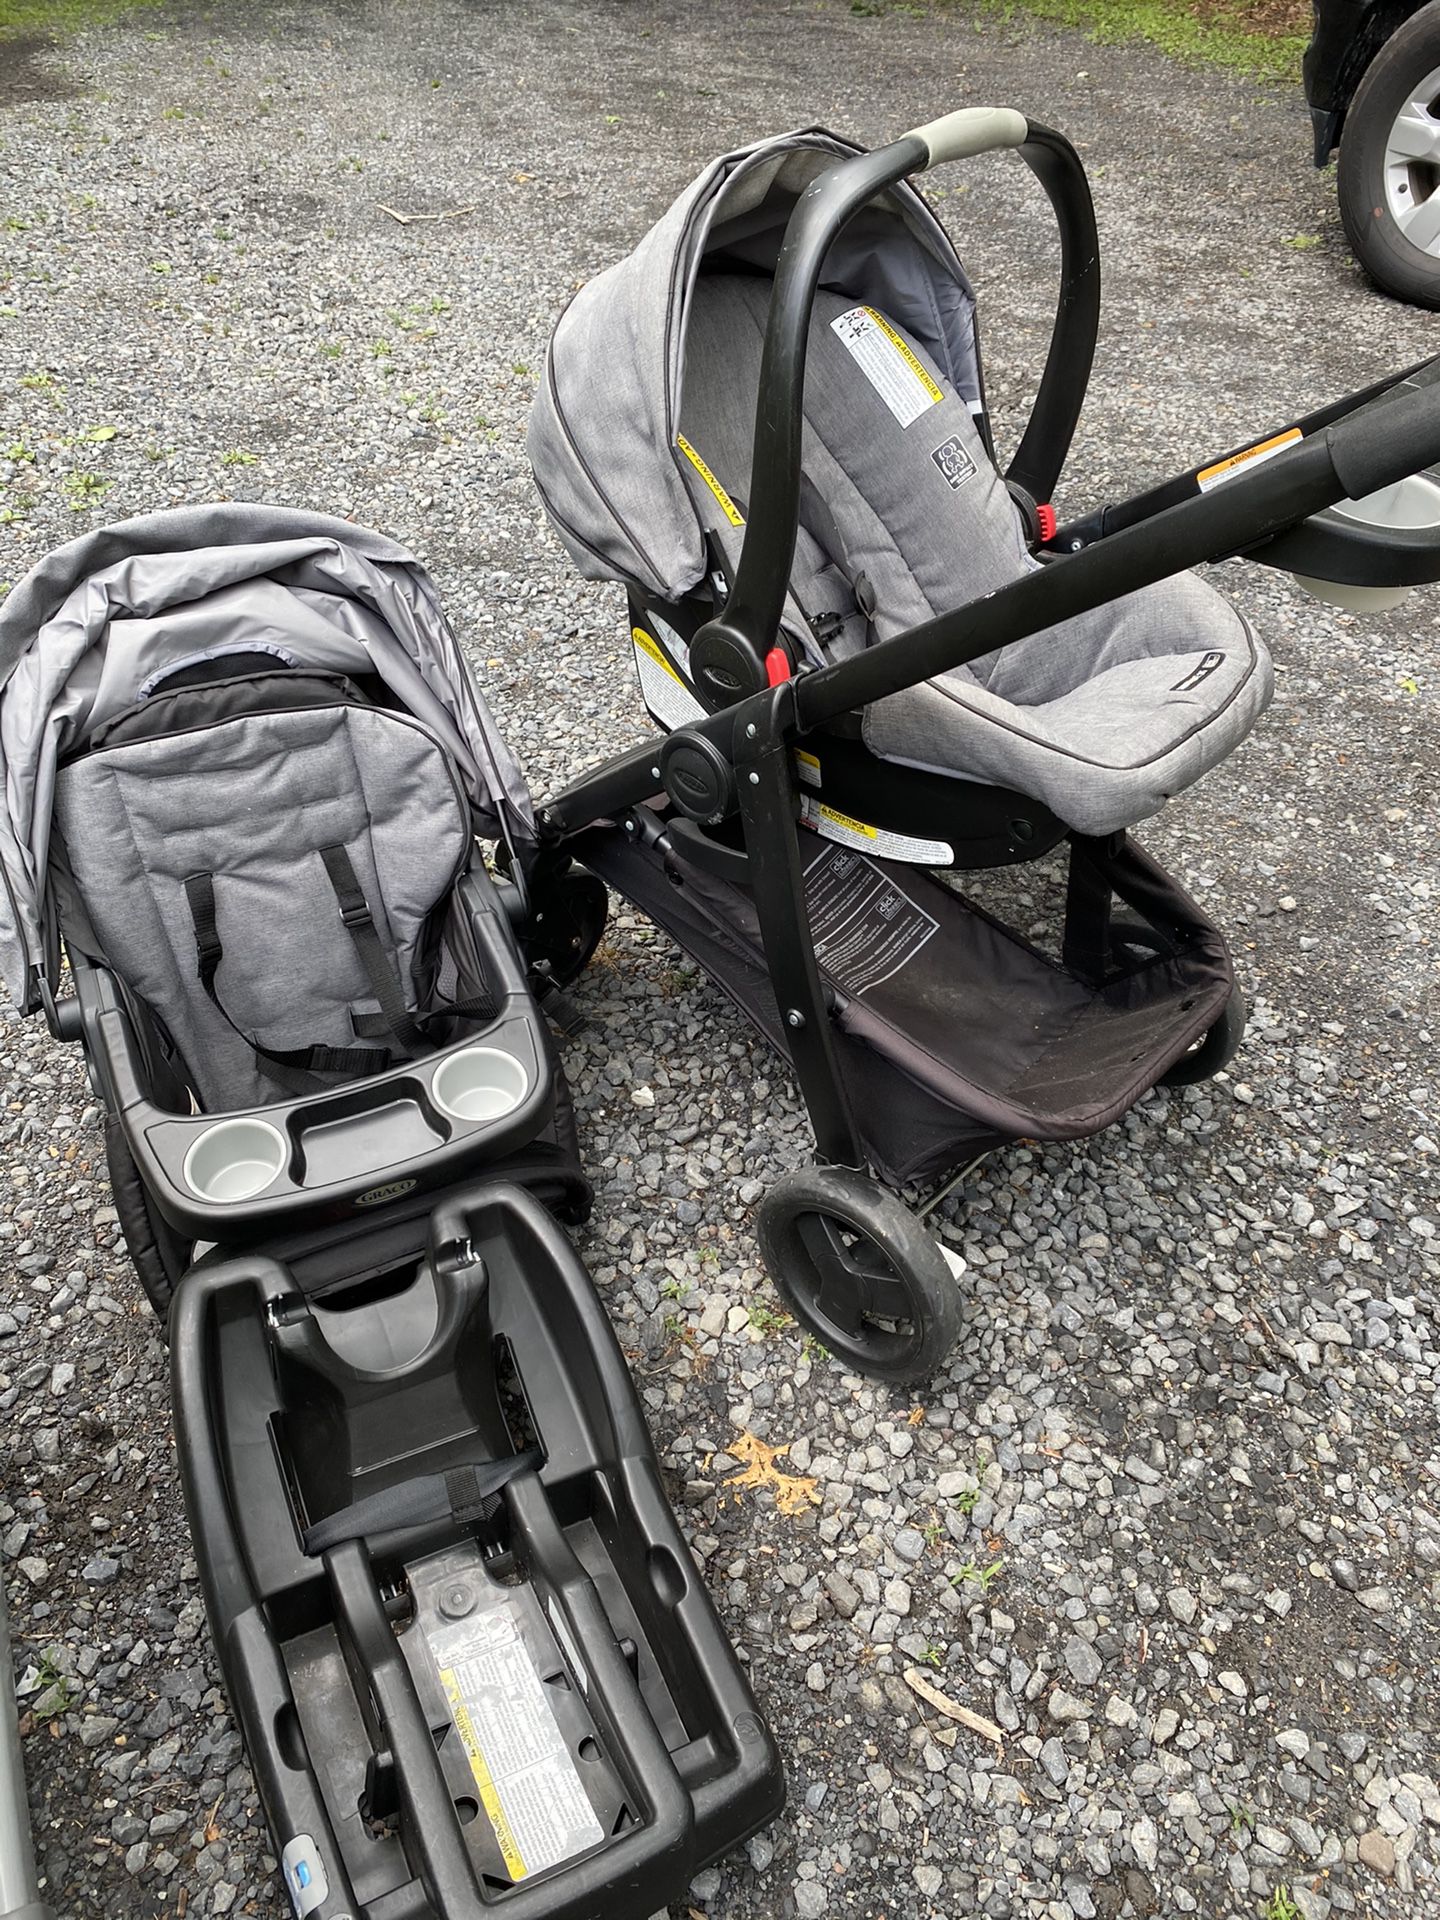 Graco stroller with car seat plus high chair